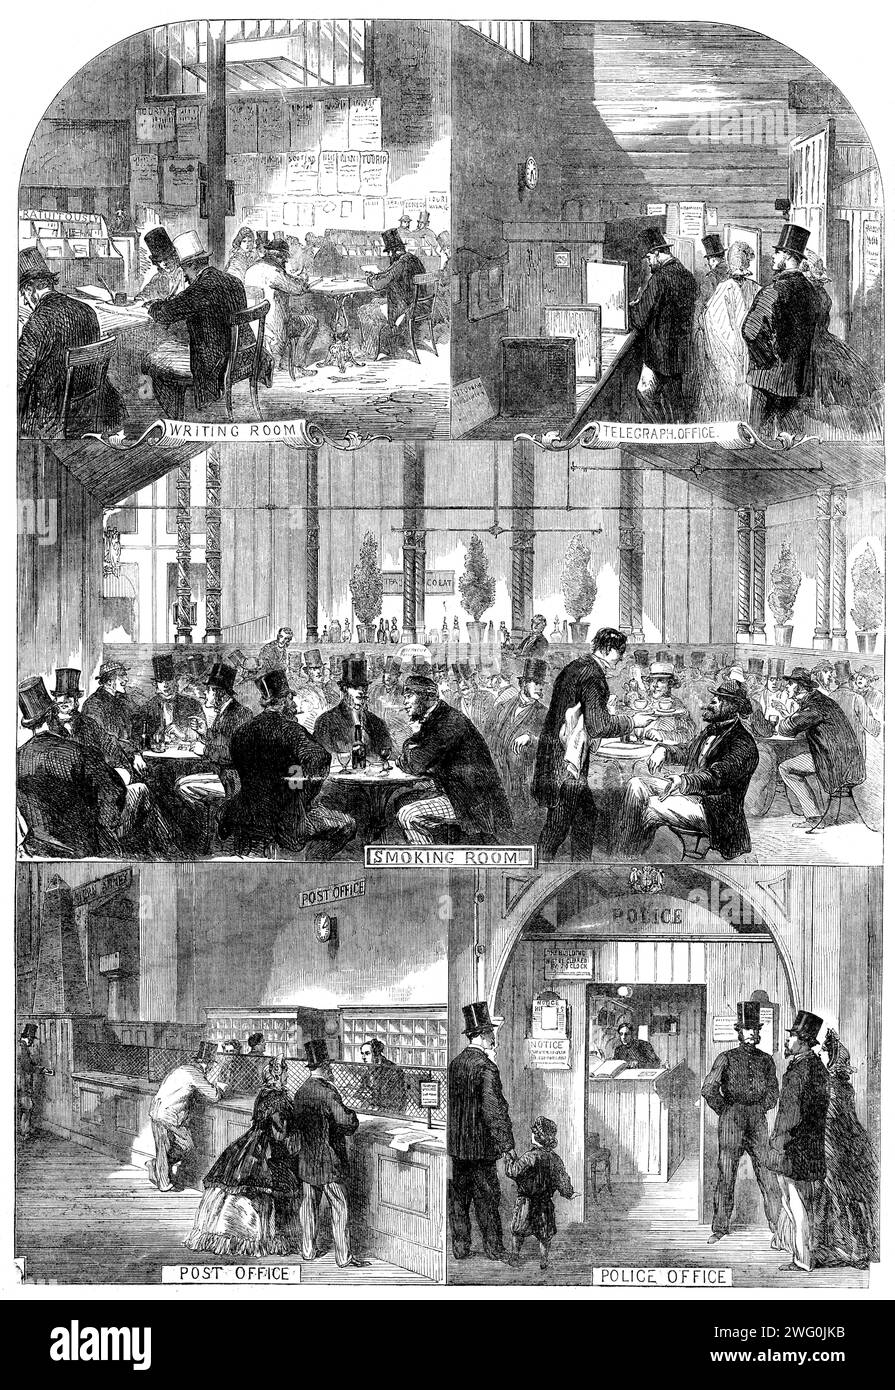 The International Exhibition - Writing Room; Telegraph Office; Smoking Room; Post Office; Police Office, 1862. 'In the centre of the Letter-writing Room are tables, and every requisite for writing letters, and postage-stamps may also be obtained at the counters...The English smoking-room...has an American bar, where, of course, you may obtain any of the American &quot;sensation&quot; drinks...or any of the innumerable varieties of slings, juleps, cobblers, cocktails, and smashes...The usefulness of the post and money-order office is proved by the fact that no less than 211,500 letters, &amp;c, Stock Photo